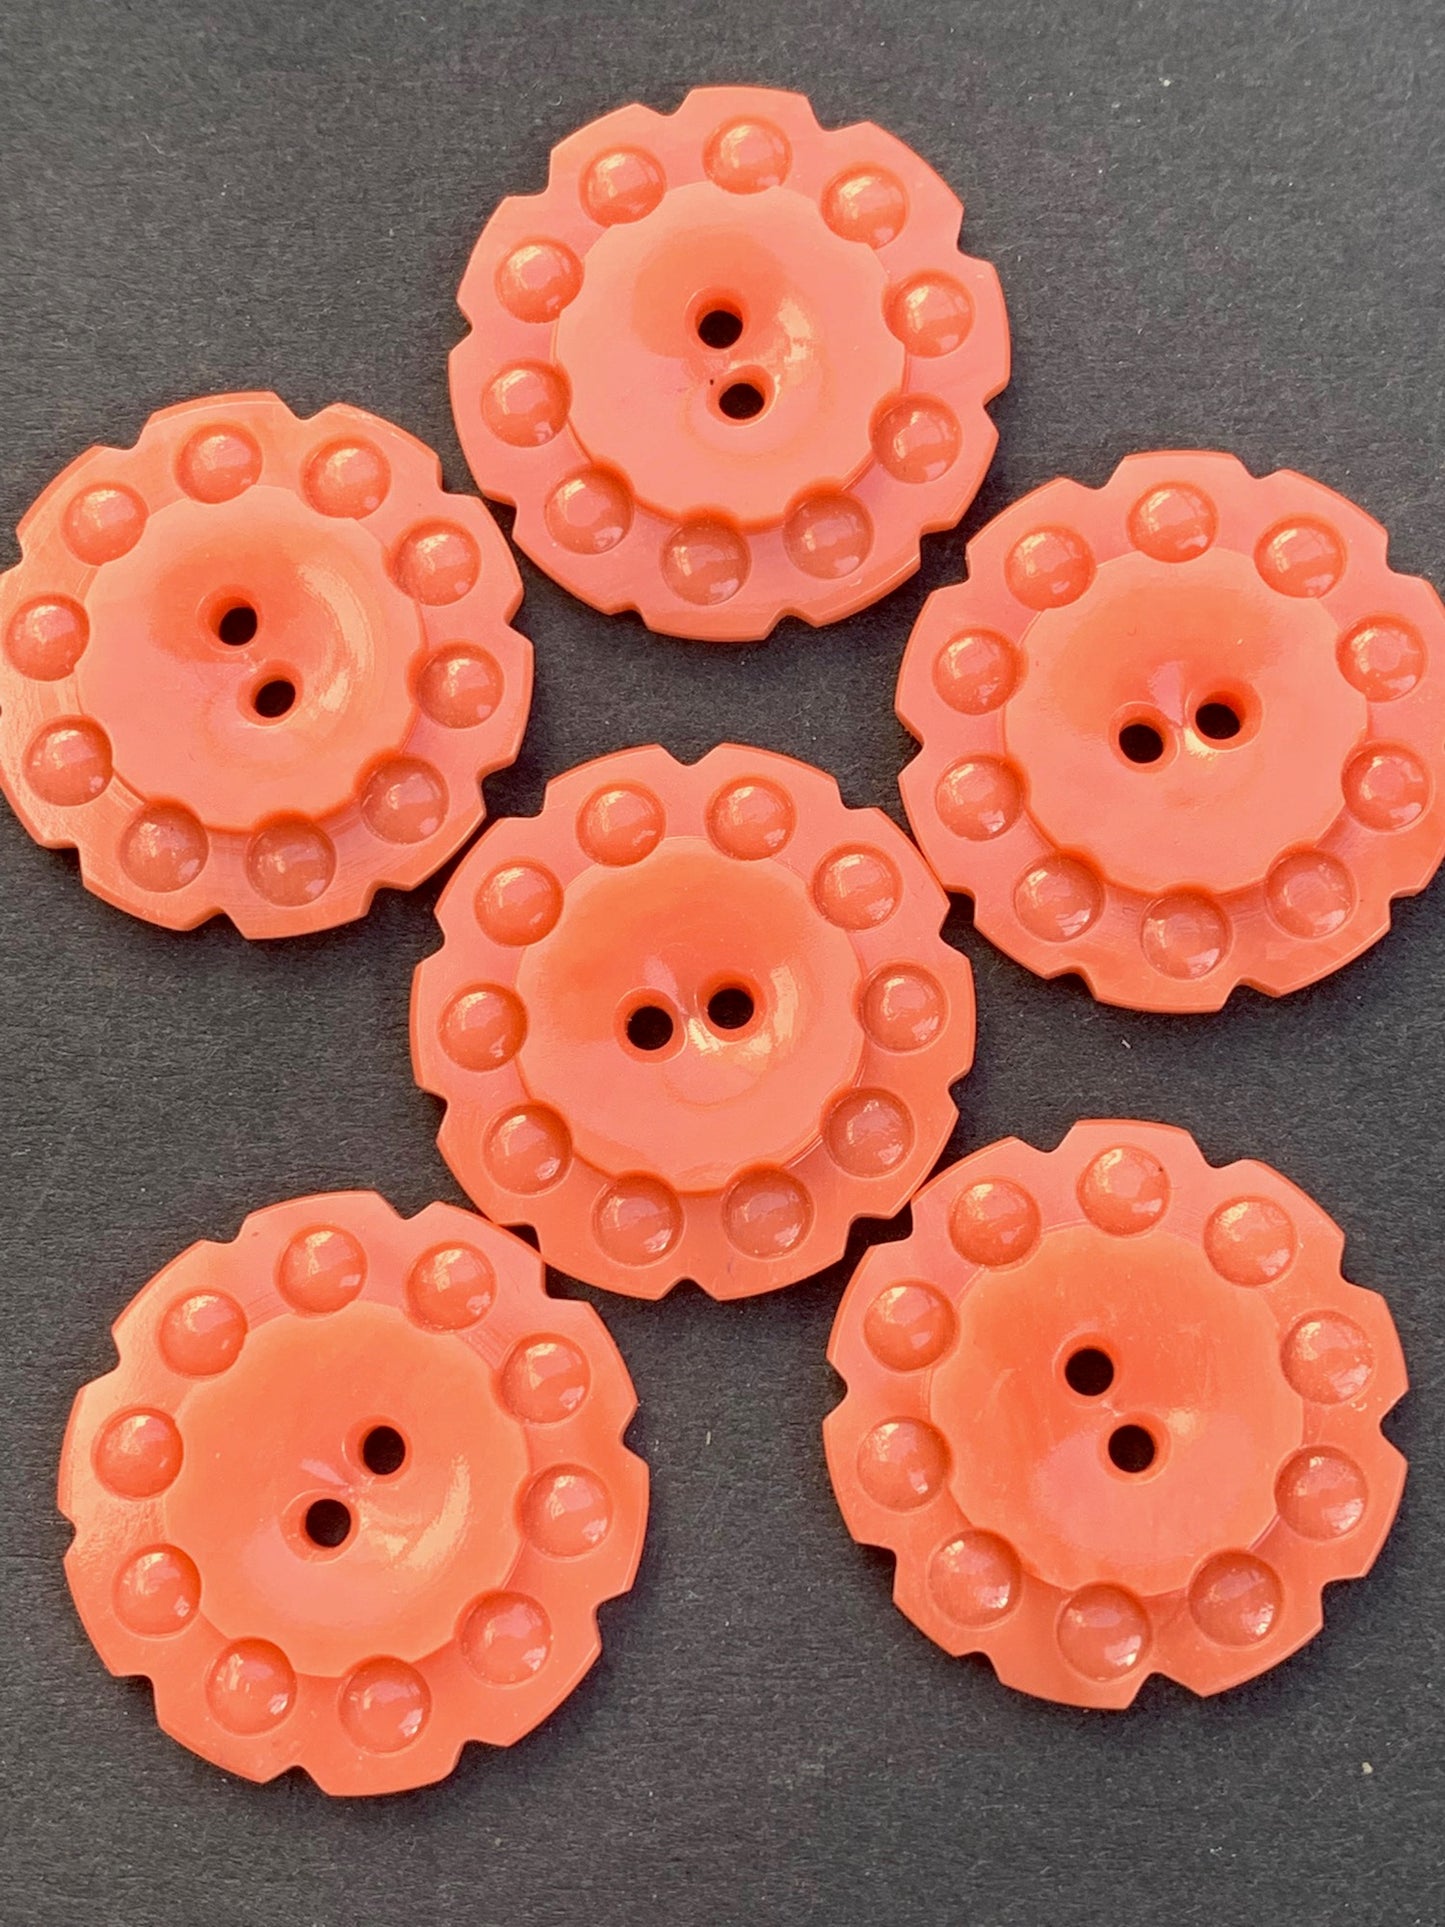 Peach coloured vintage  Buttons - 1.7cm or 2.2cm, Lots of 6 or Sheet of 24